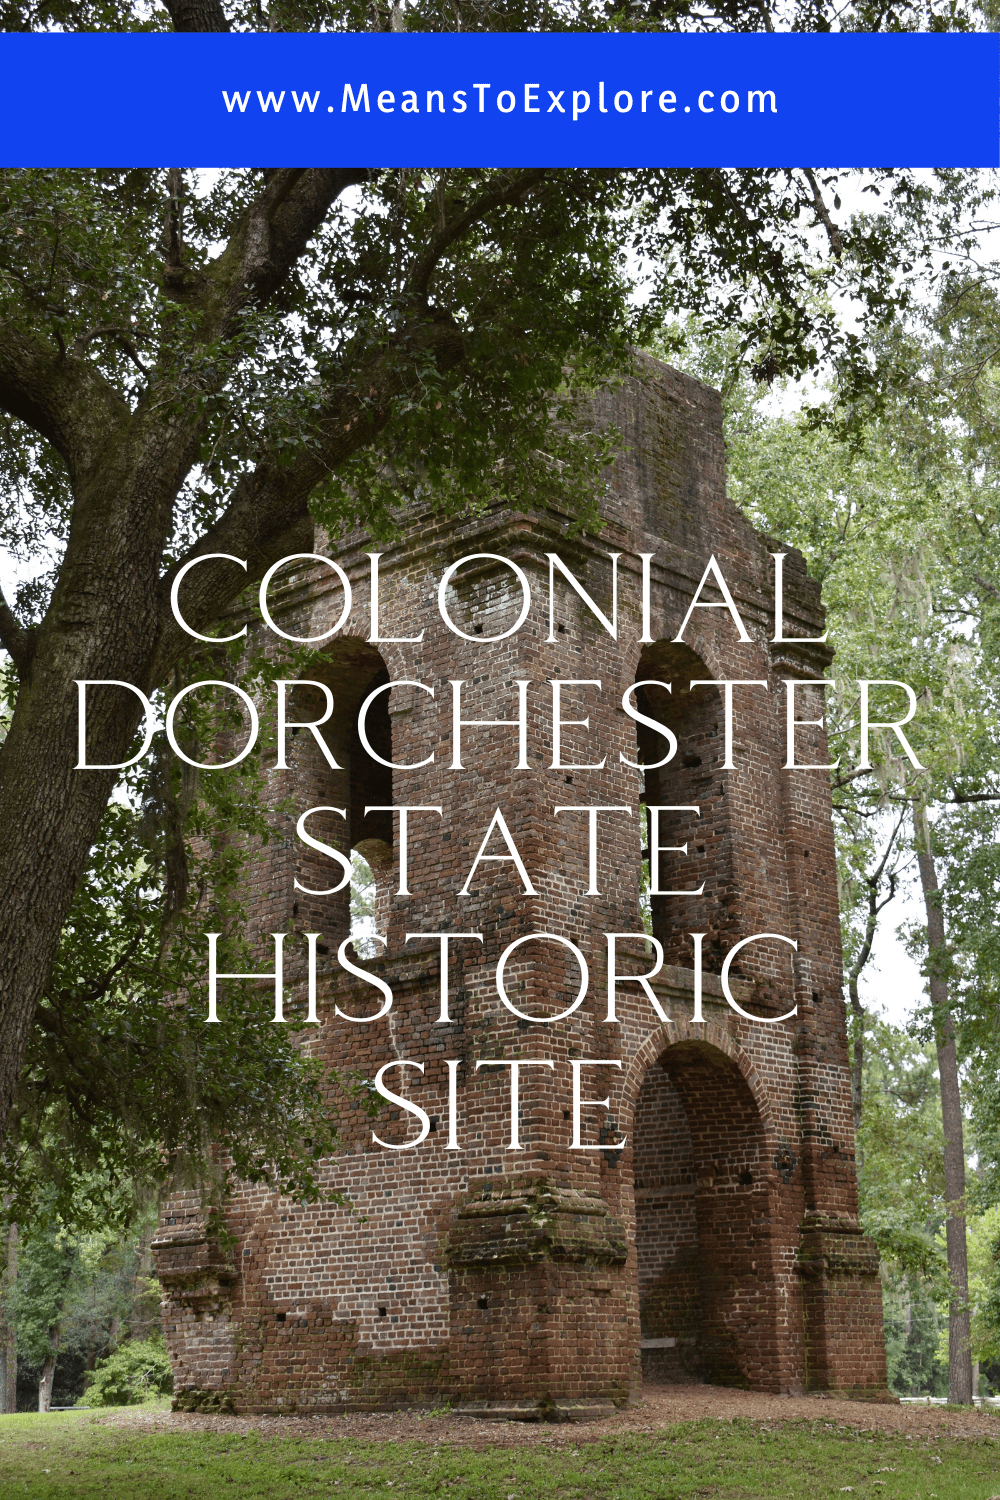 Guide to Colonial Dorchester State Historic Site